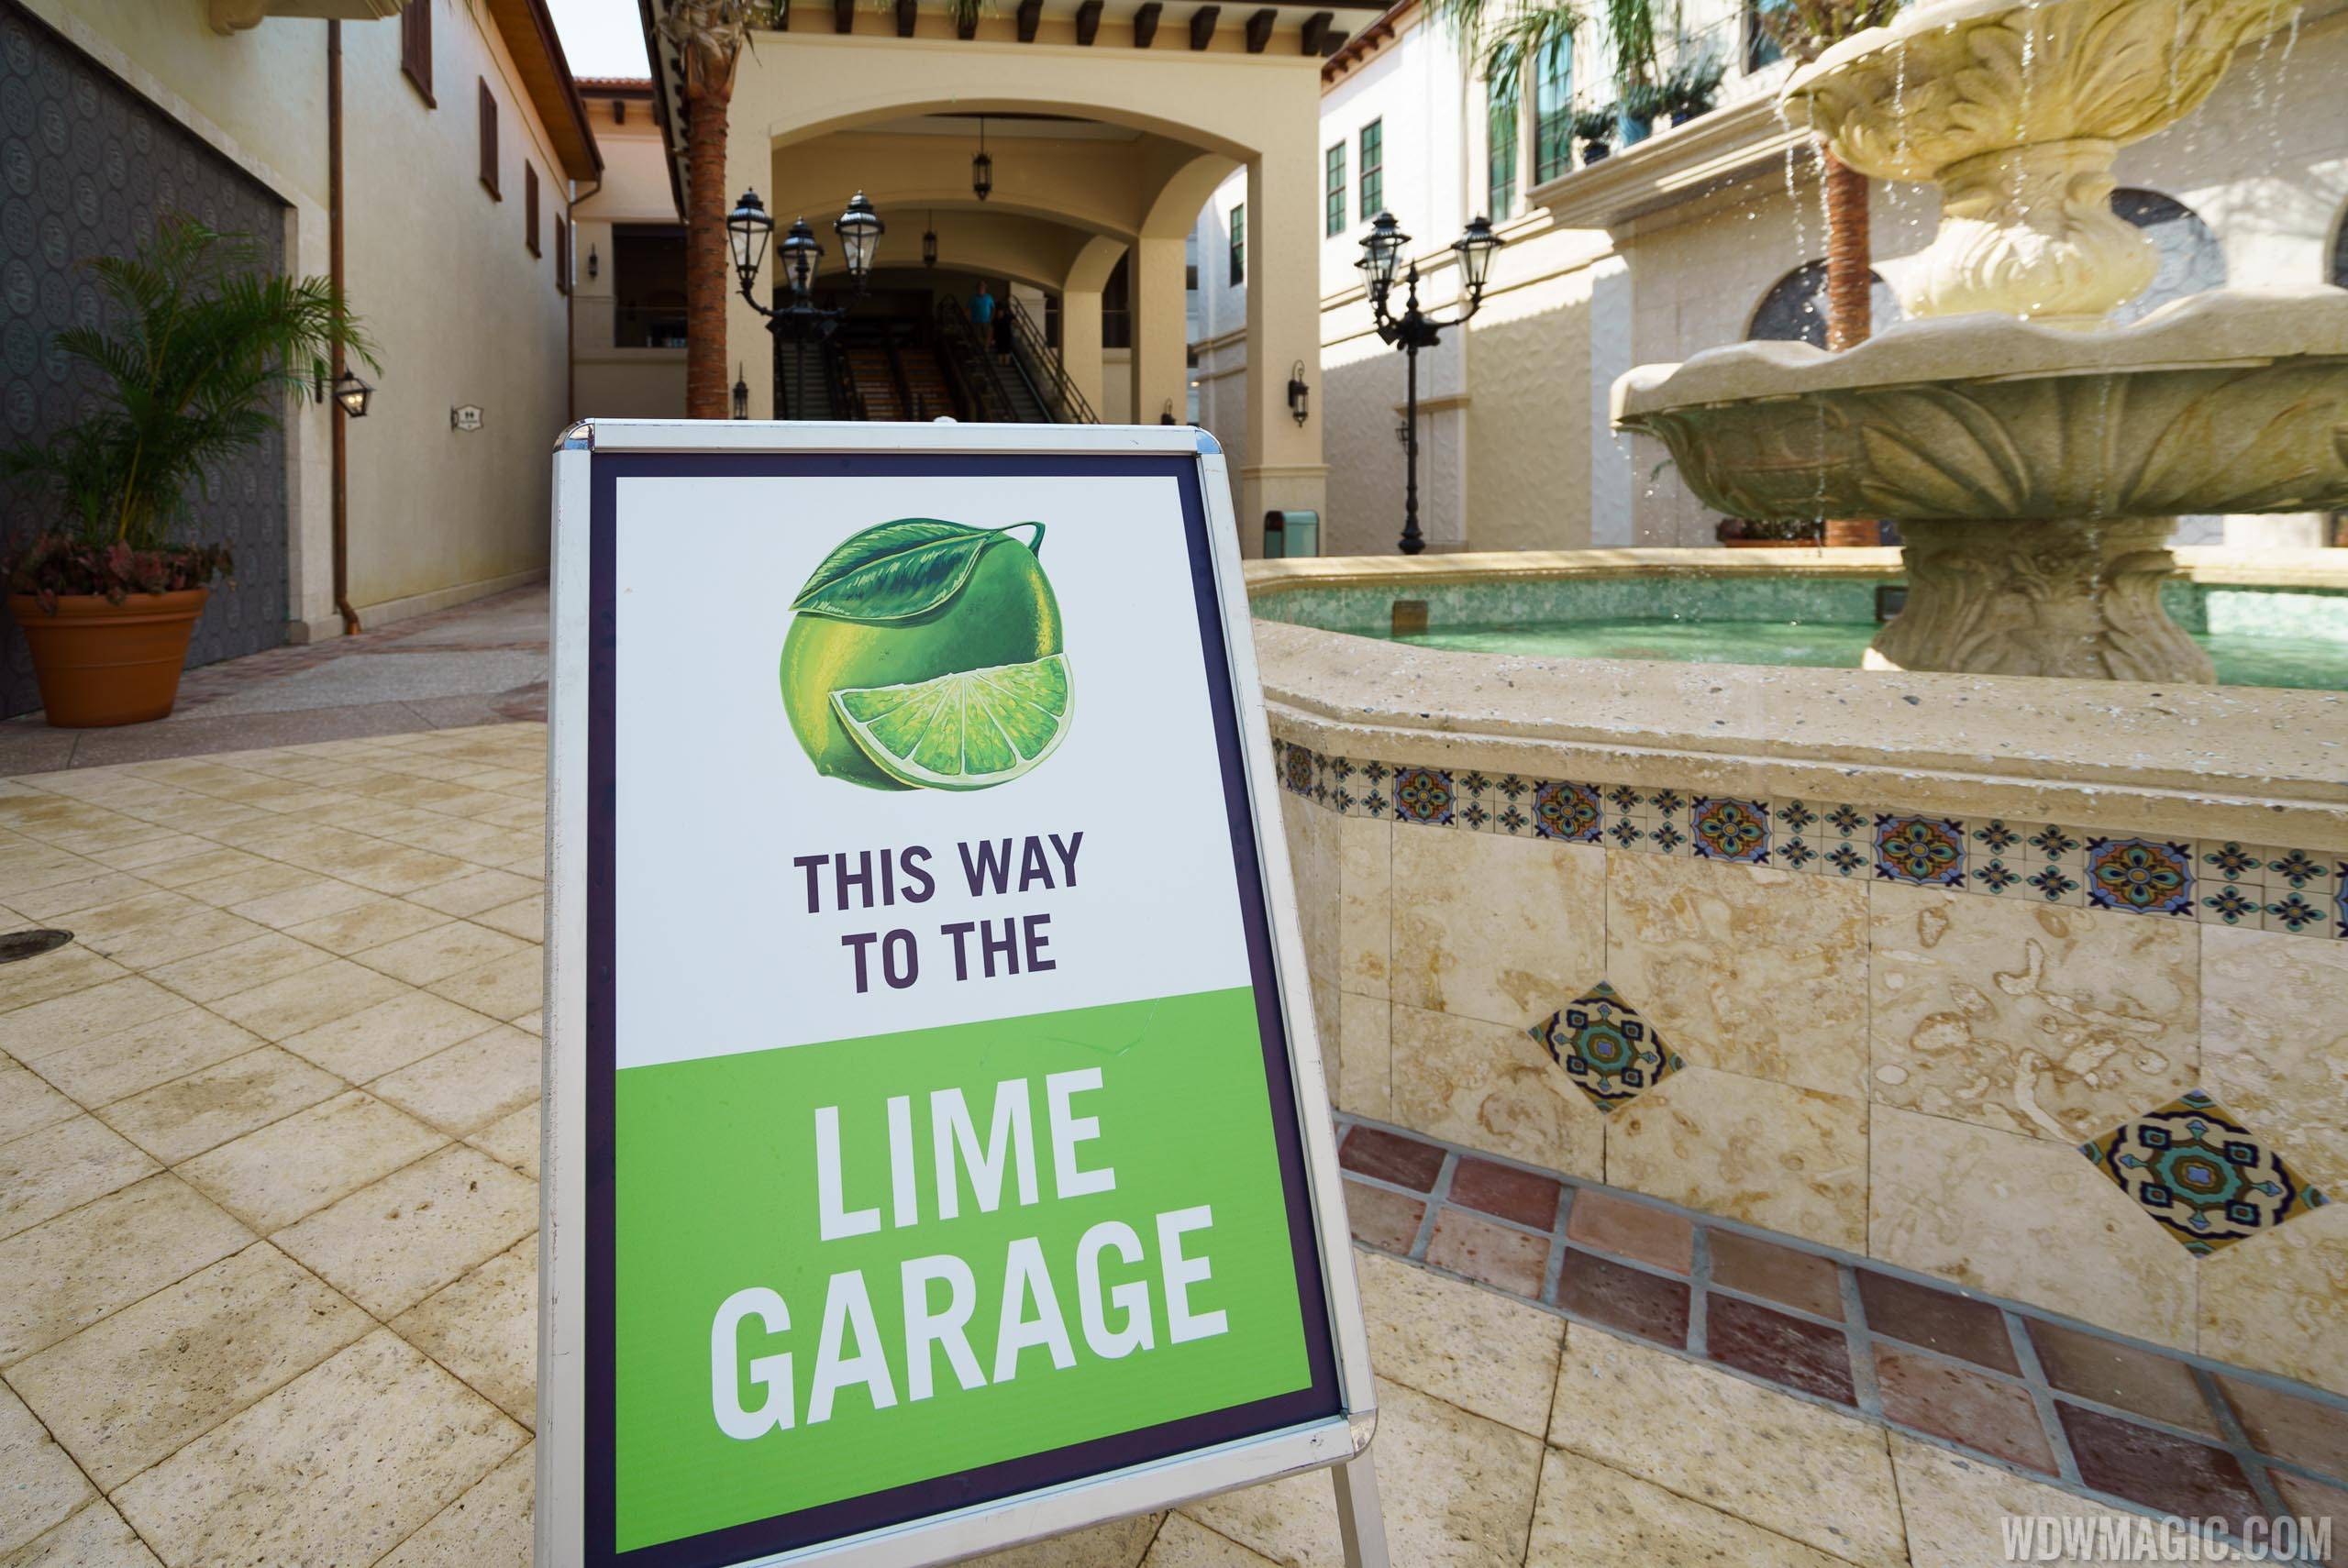 Lime Garage entry from Town Center